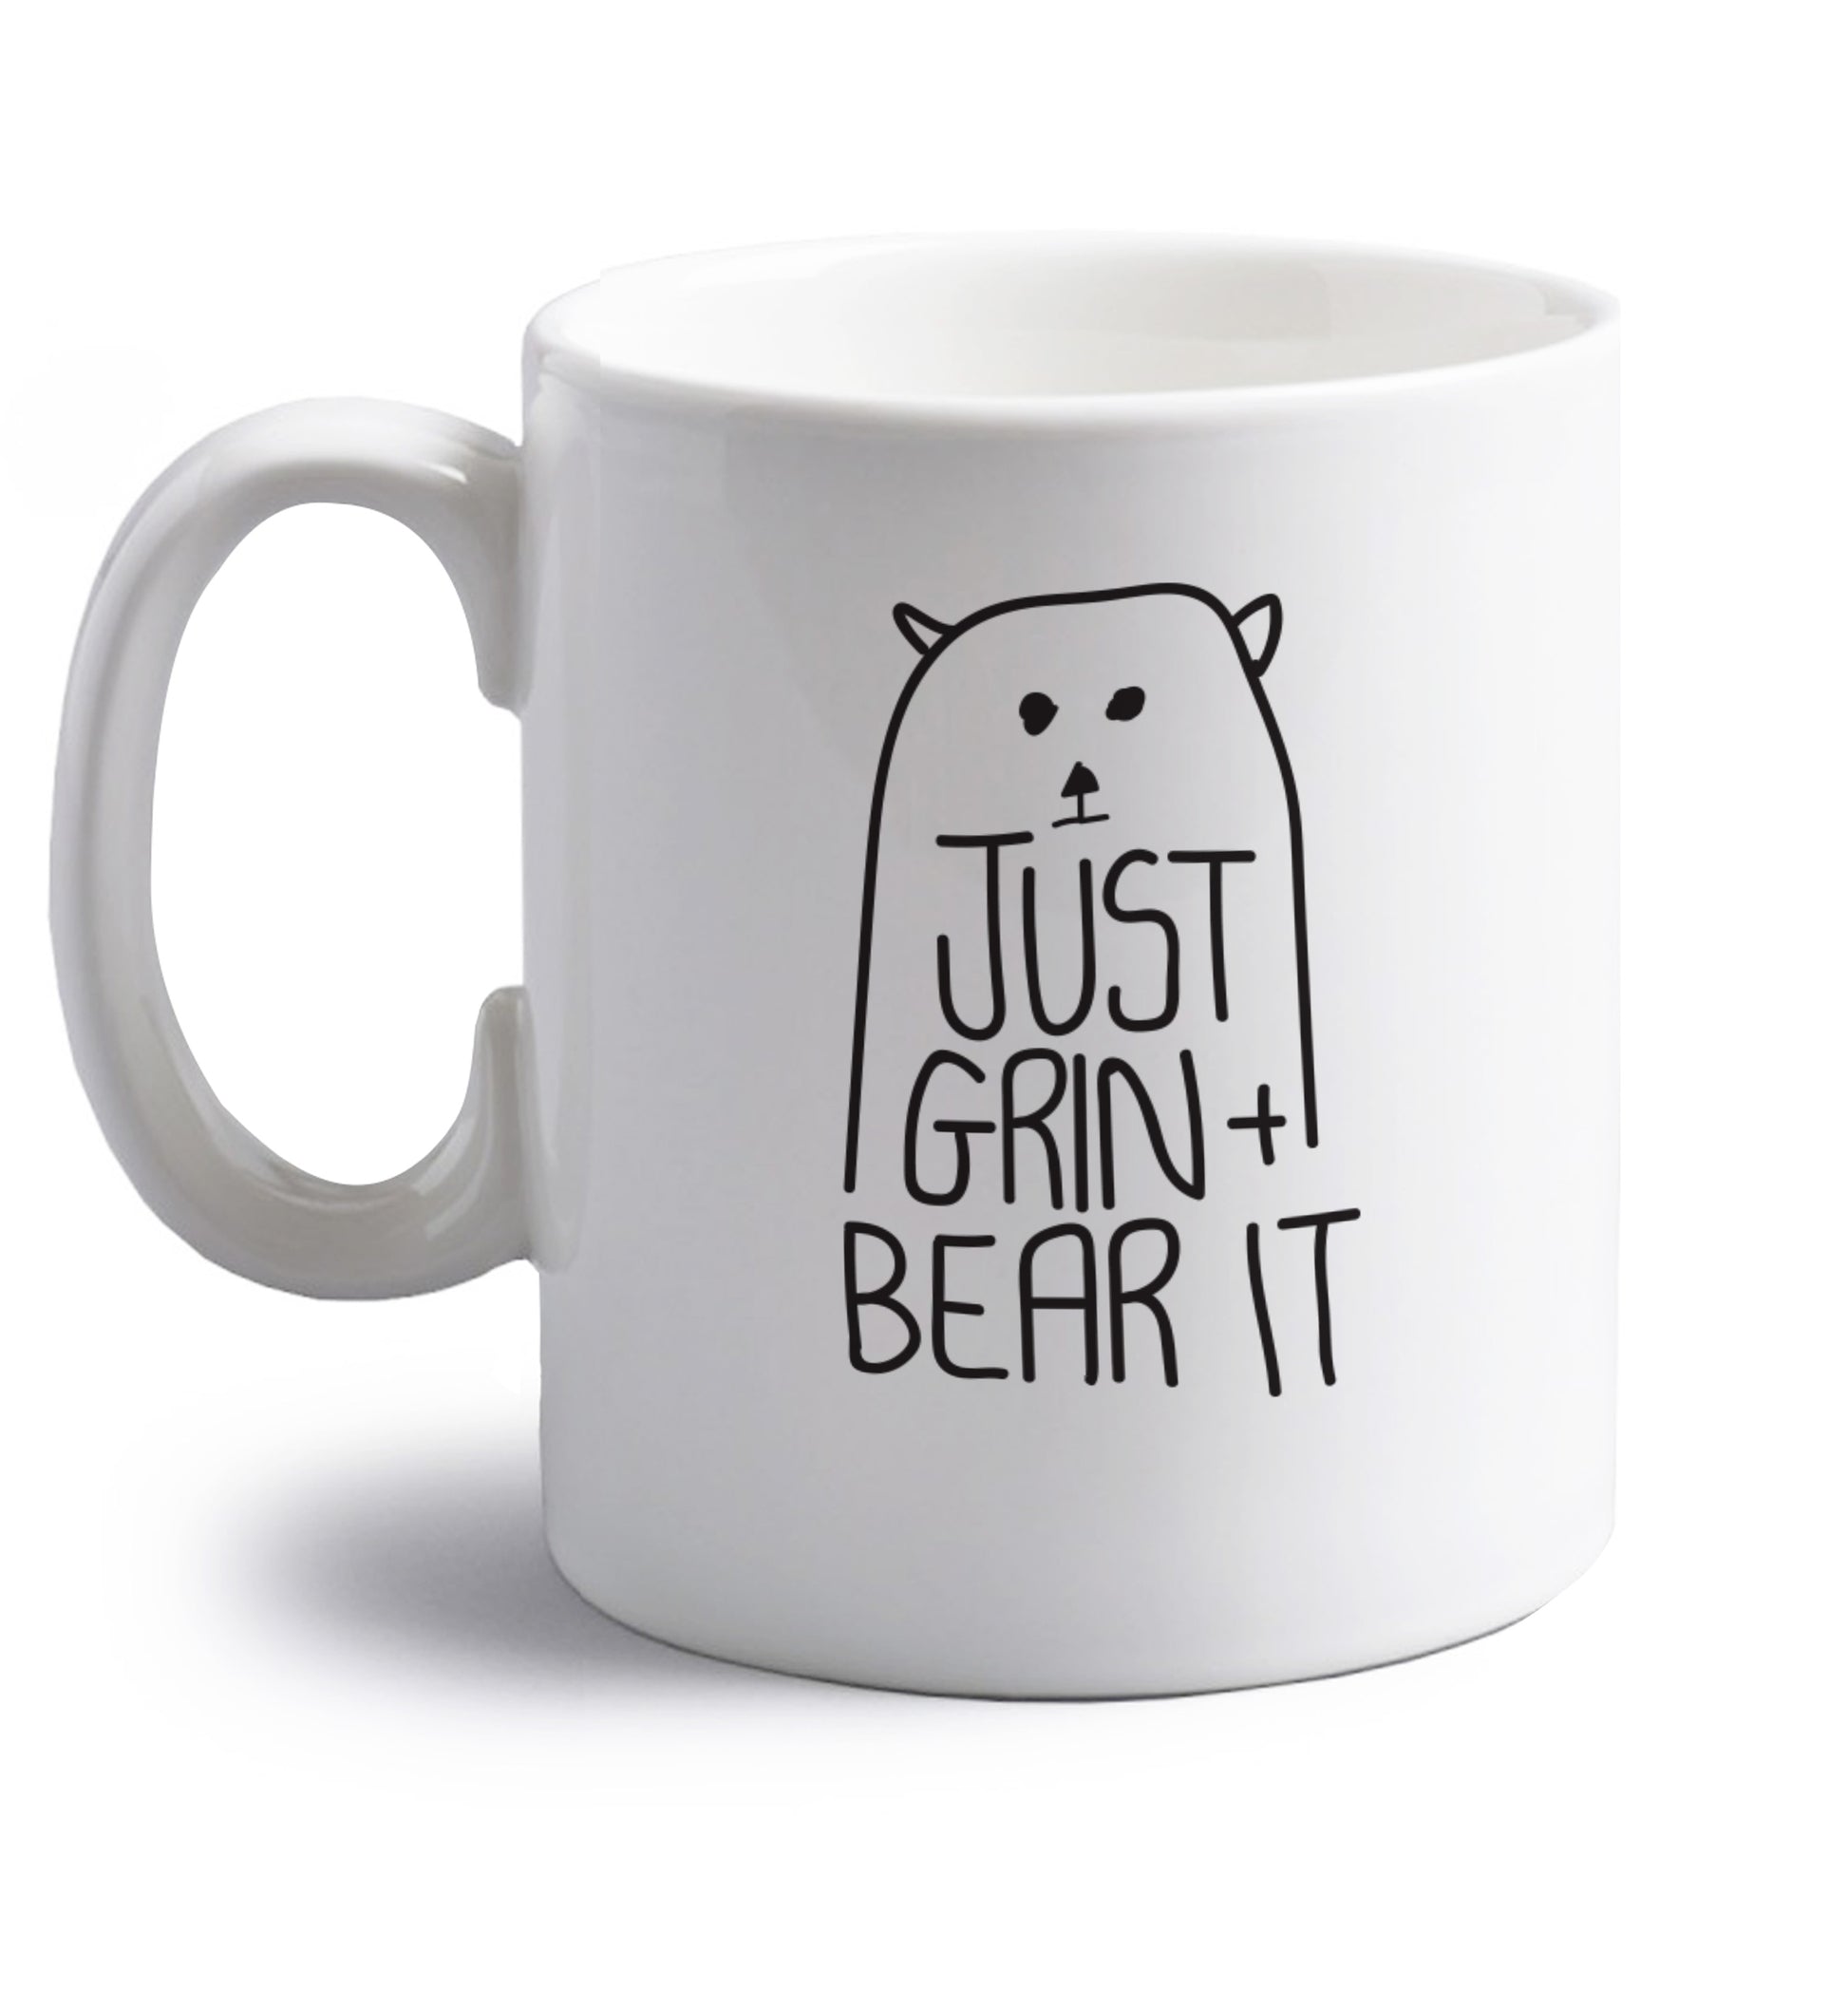 Just grin and bear it right handed white ceramic mug 